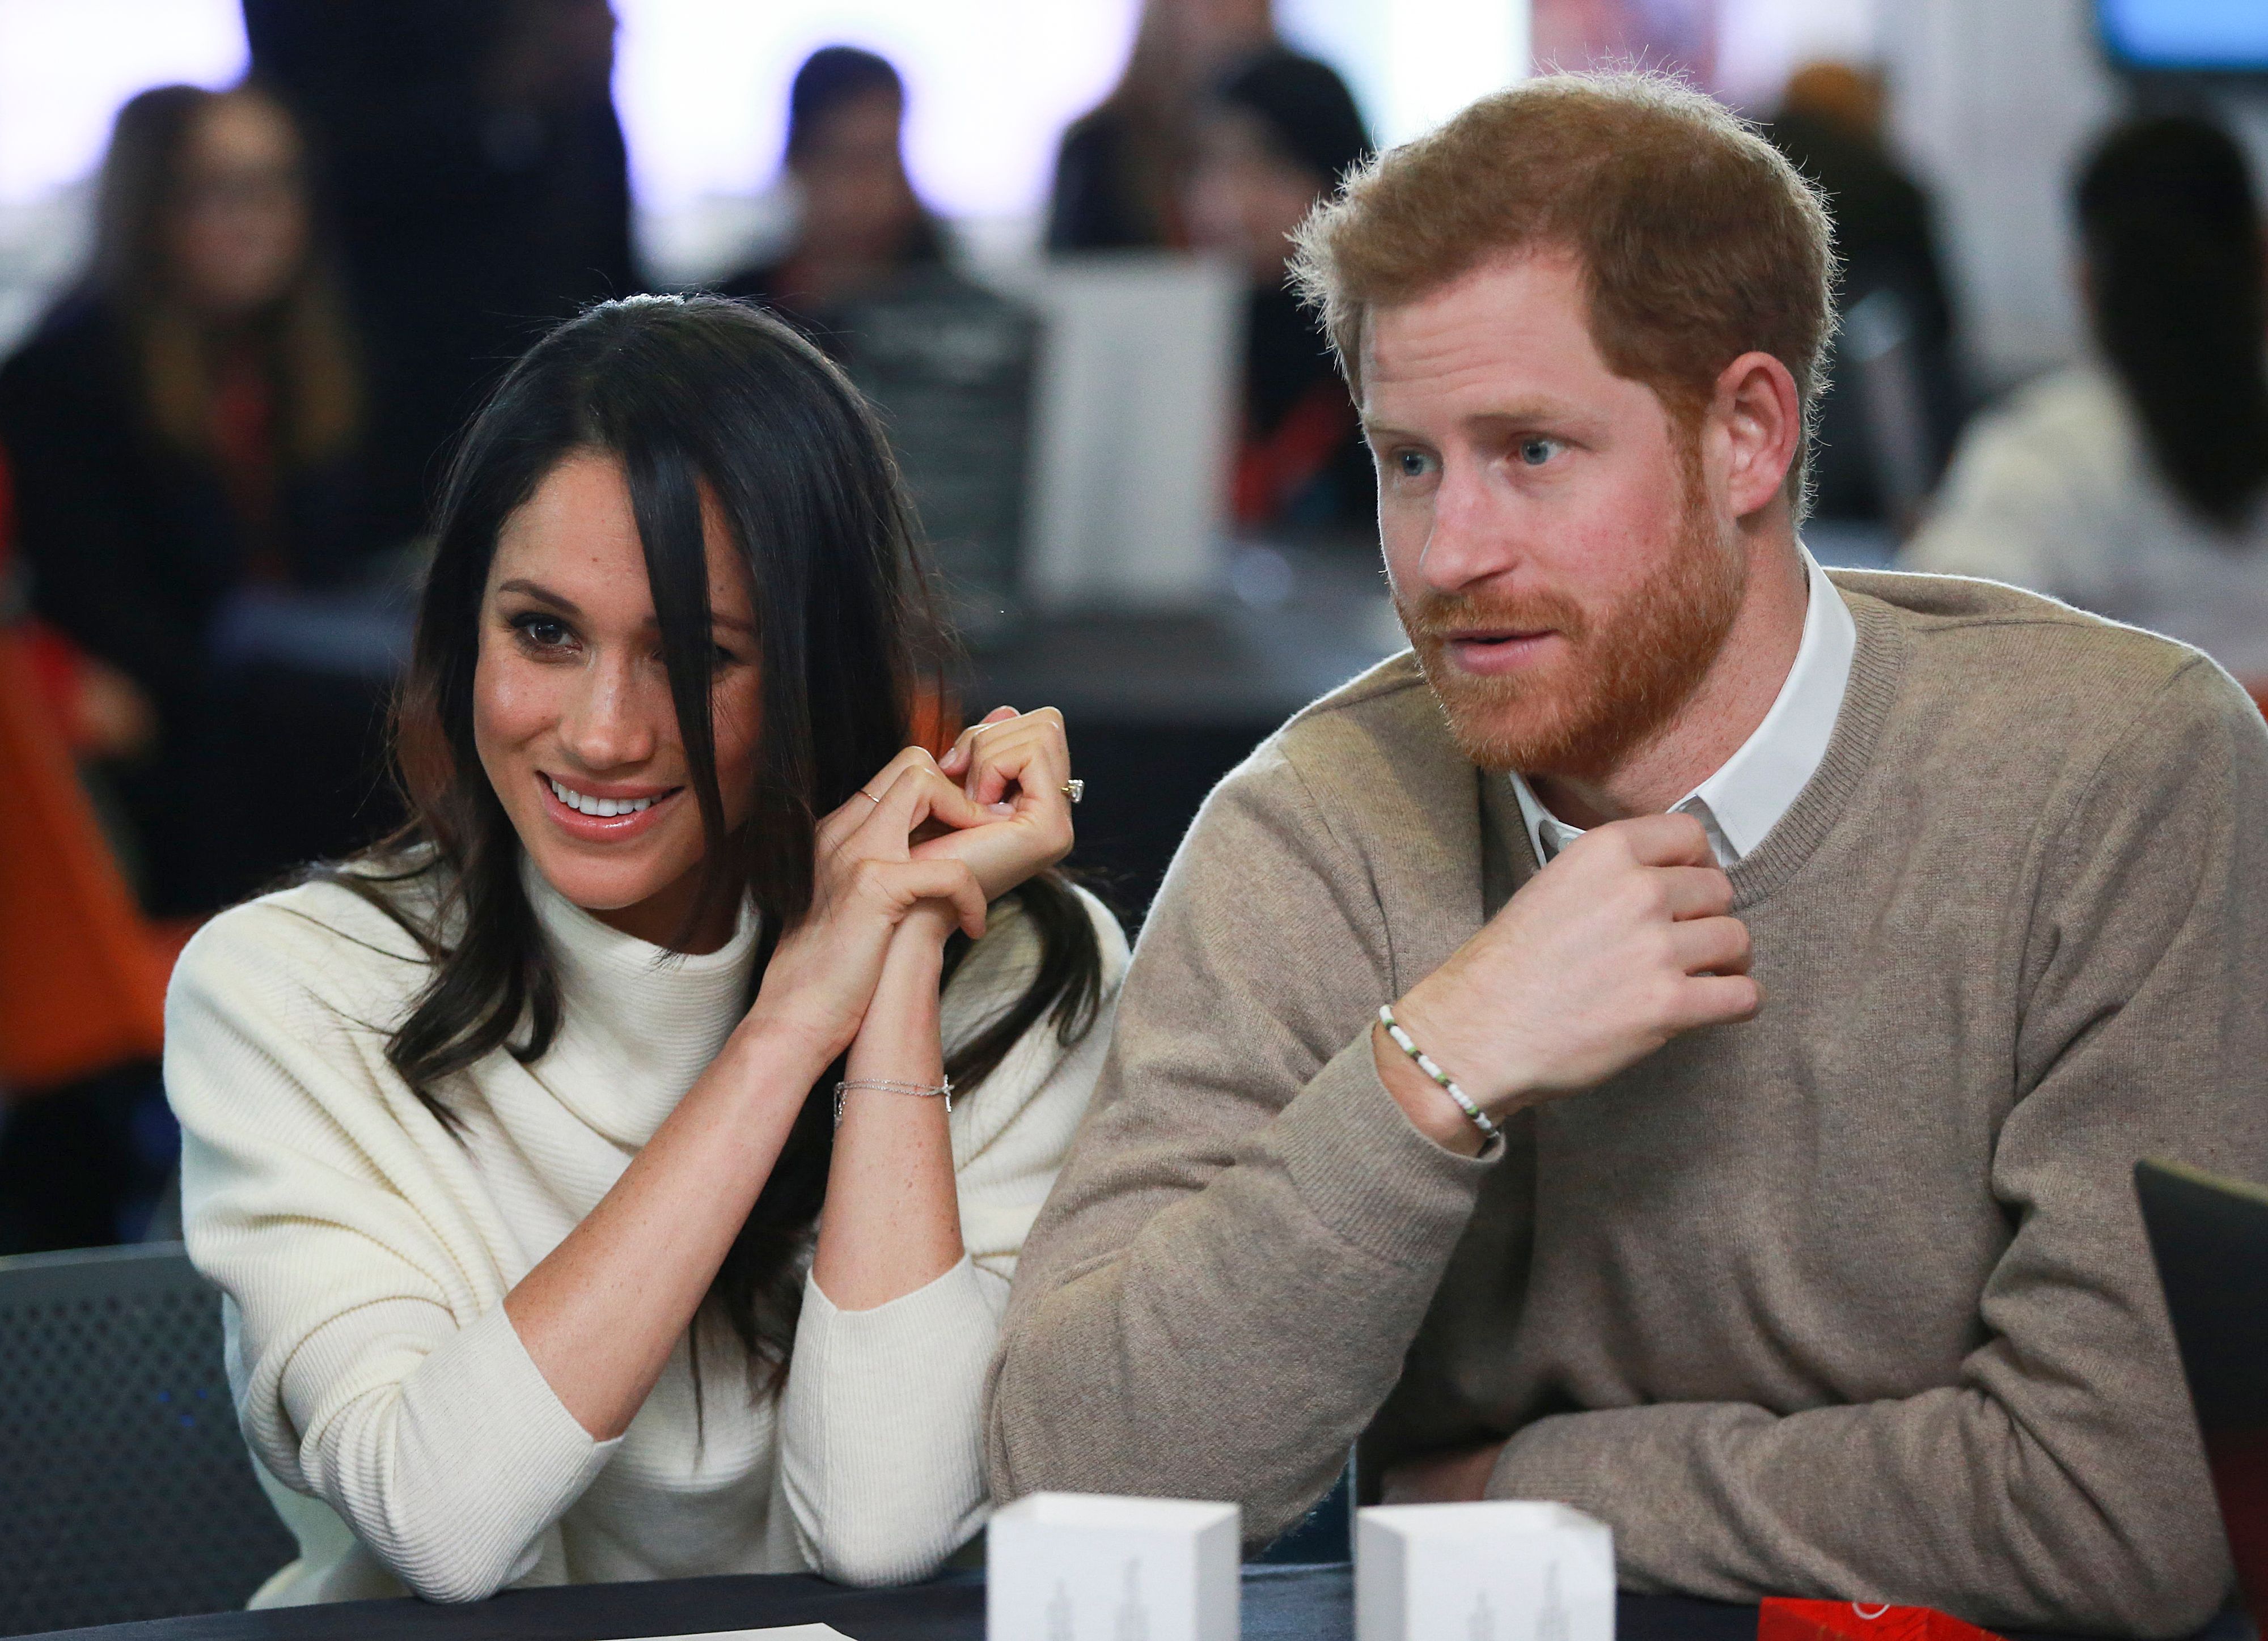 Prince Harry and Meghan Markle attend an event hosted by social enterprise Stemettes to celebrate International Women's Day at Millennium Point in Birmingham on March 8, 2018. | Source: Getty Images